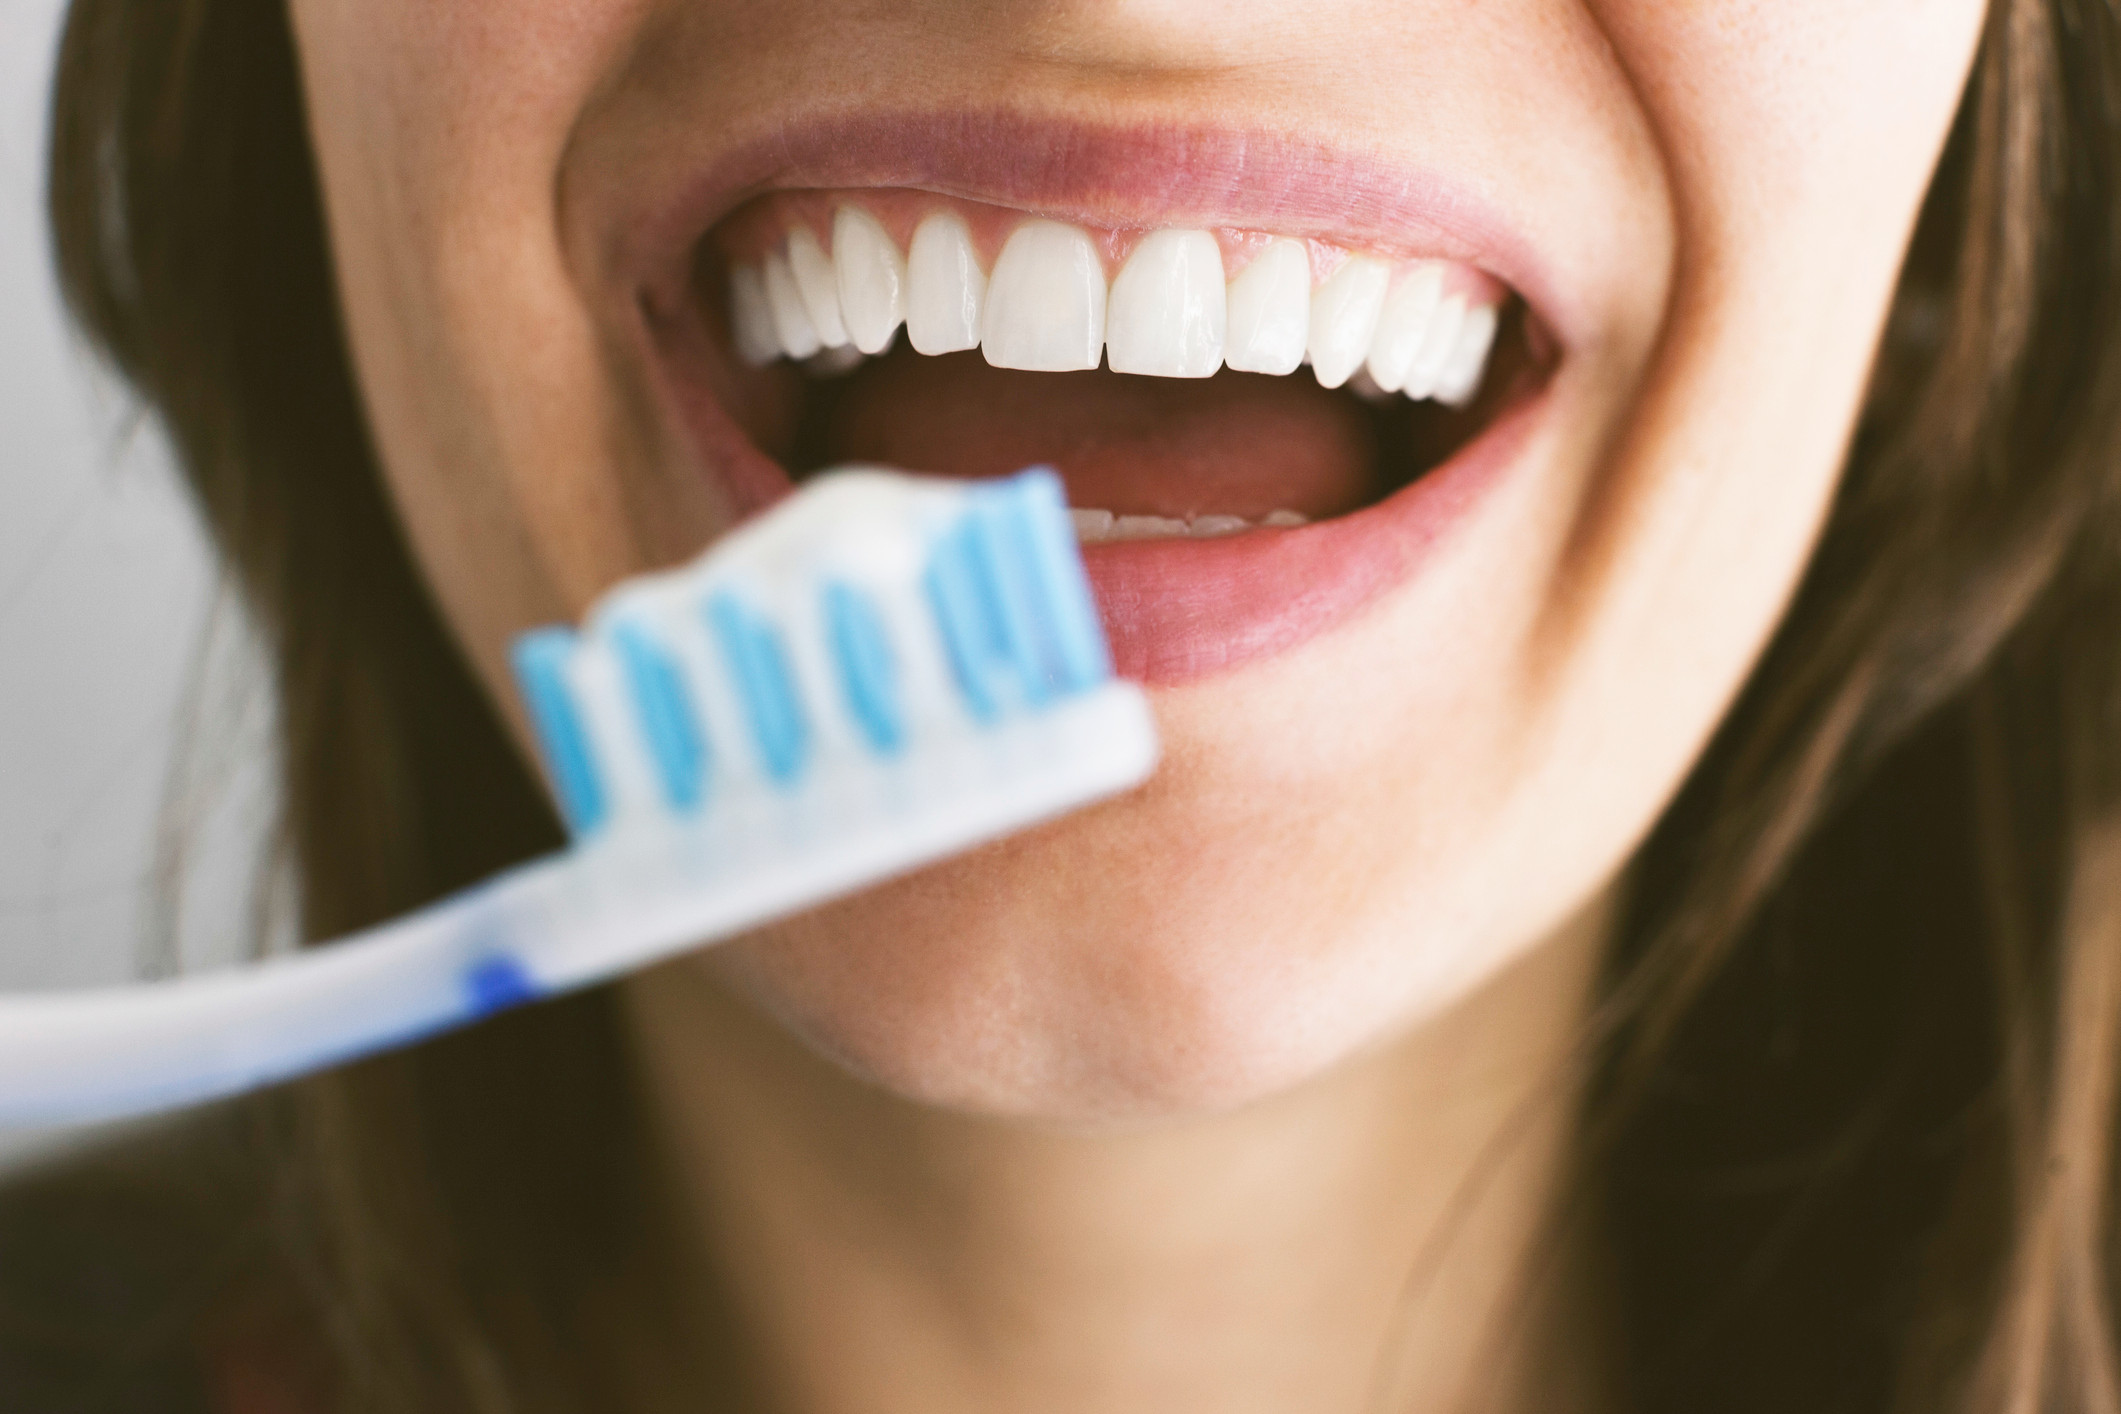 Is it bad to brush your teeth 3 times a day?